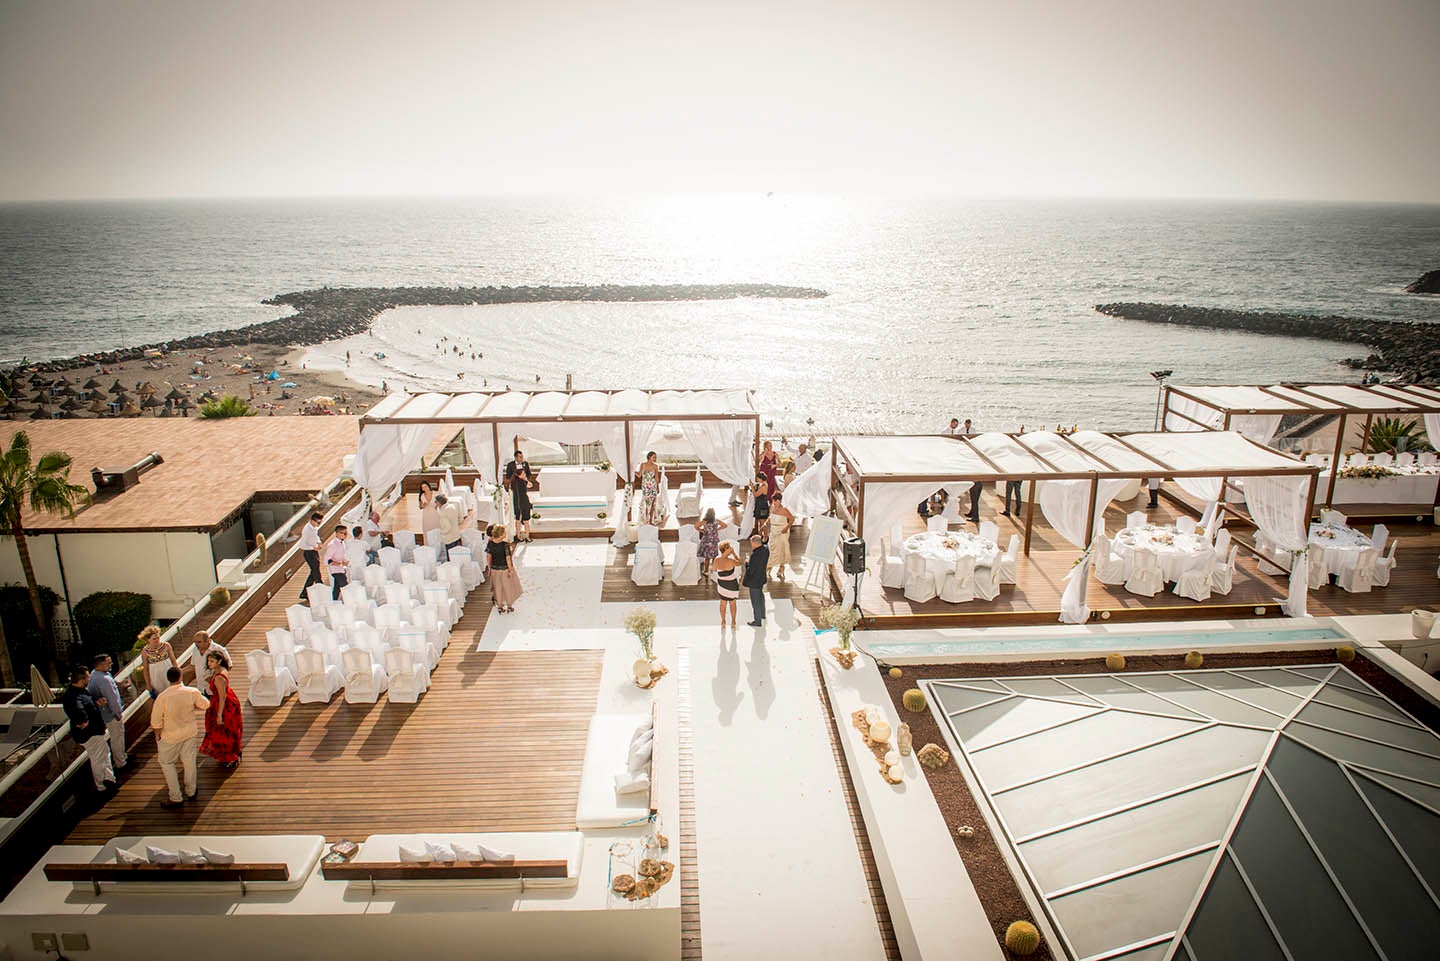 Aerial view of a wedding set-up facing the sea